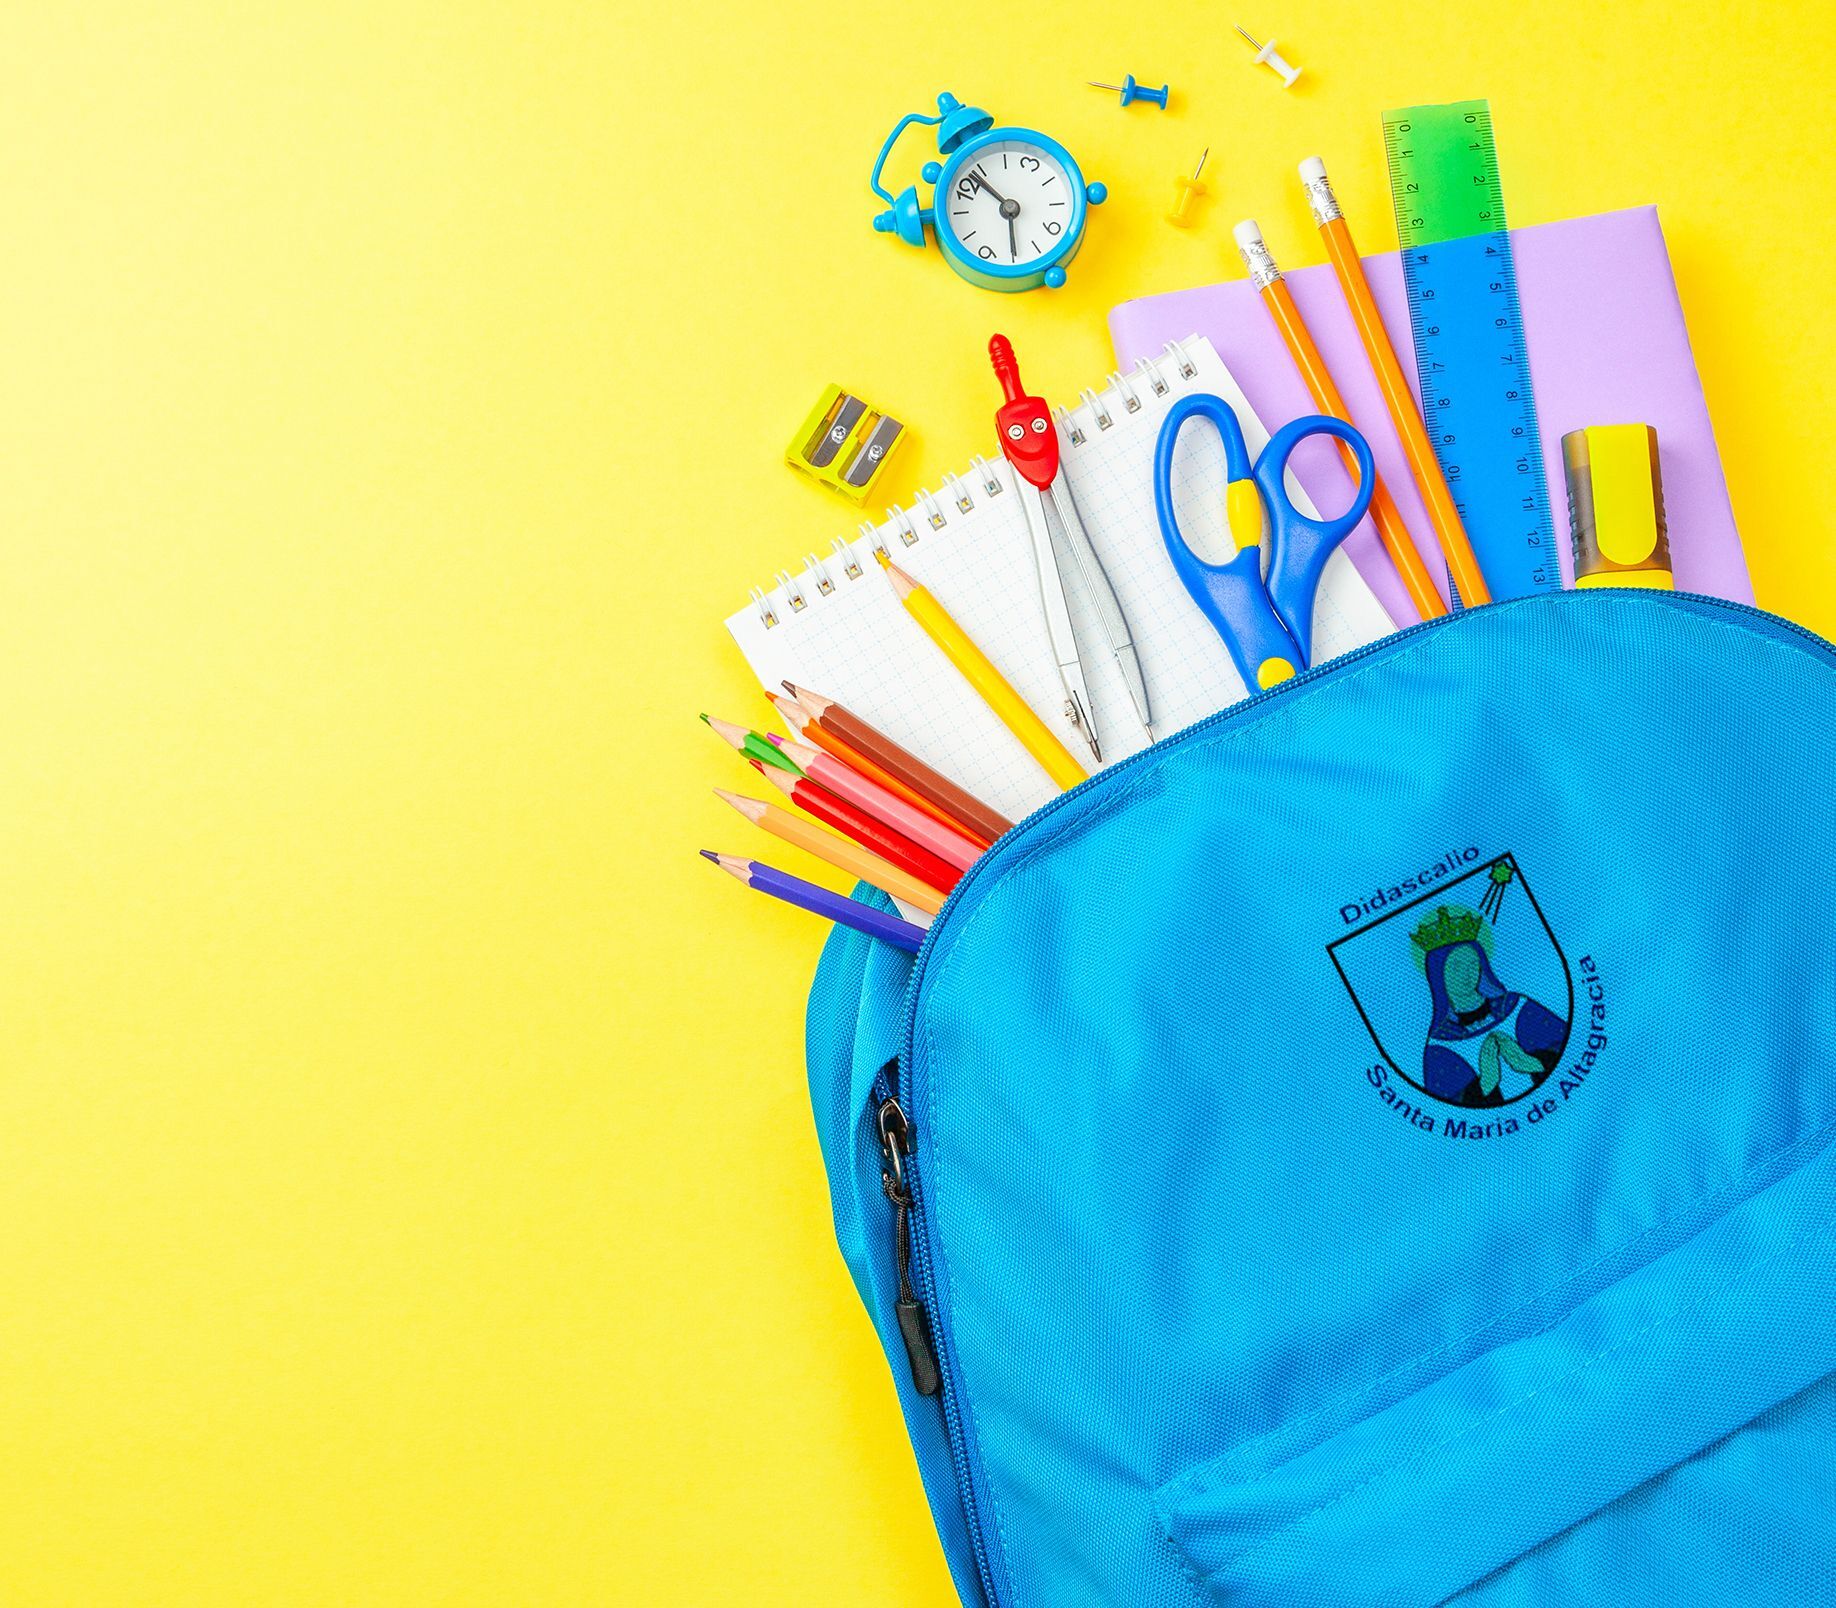 7 TIPS TO PREPARE FOR THE FIRST DAY OF SCHOOL